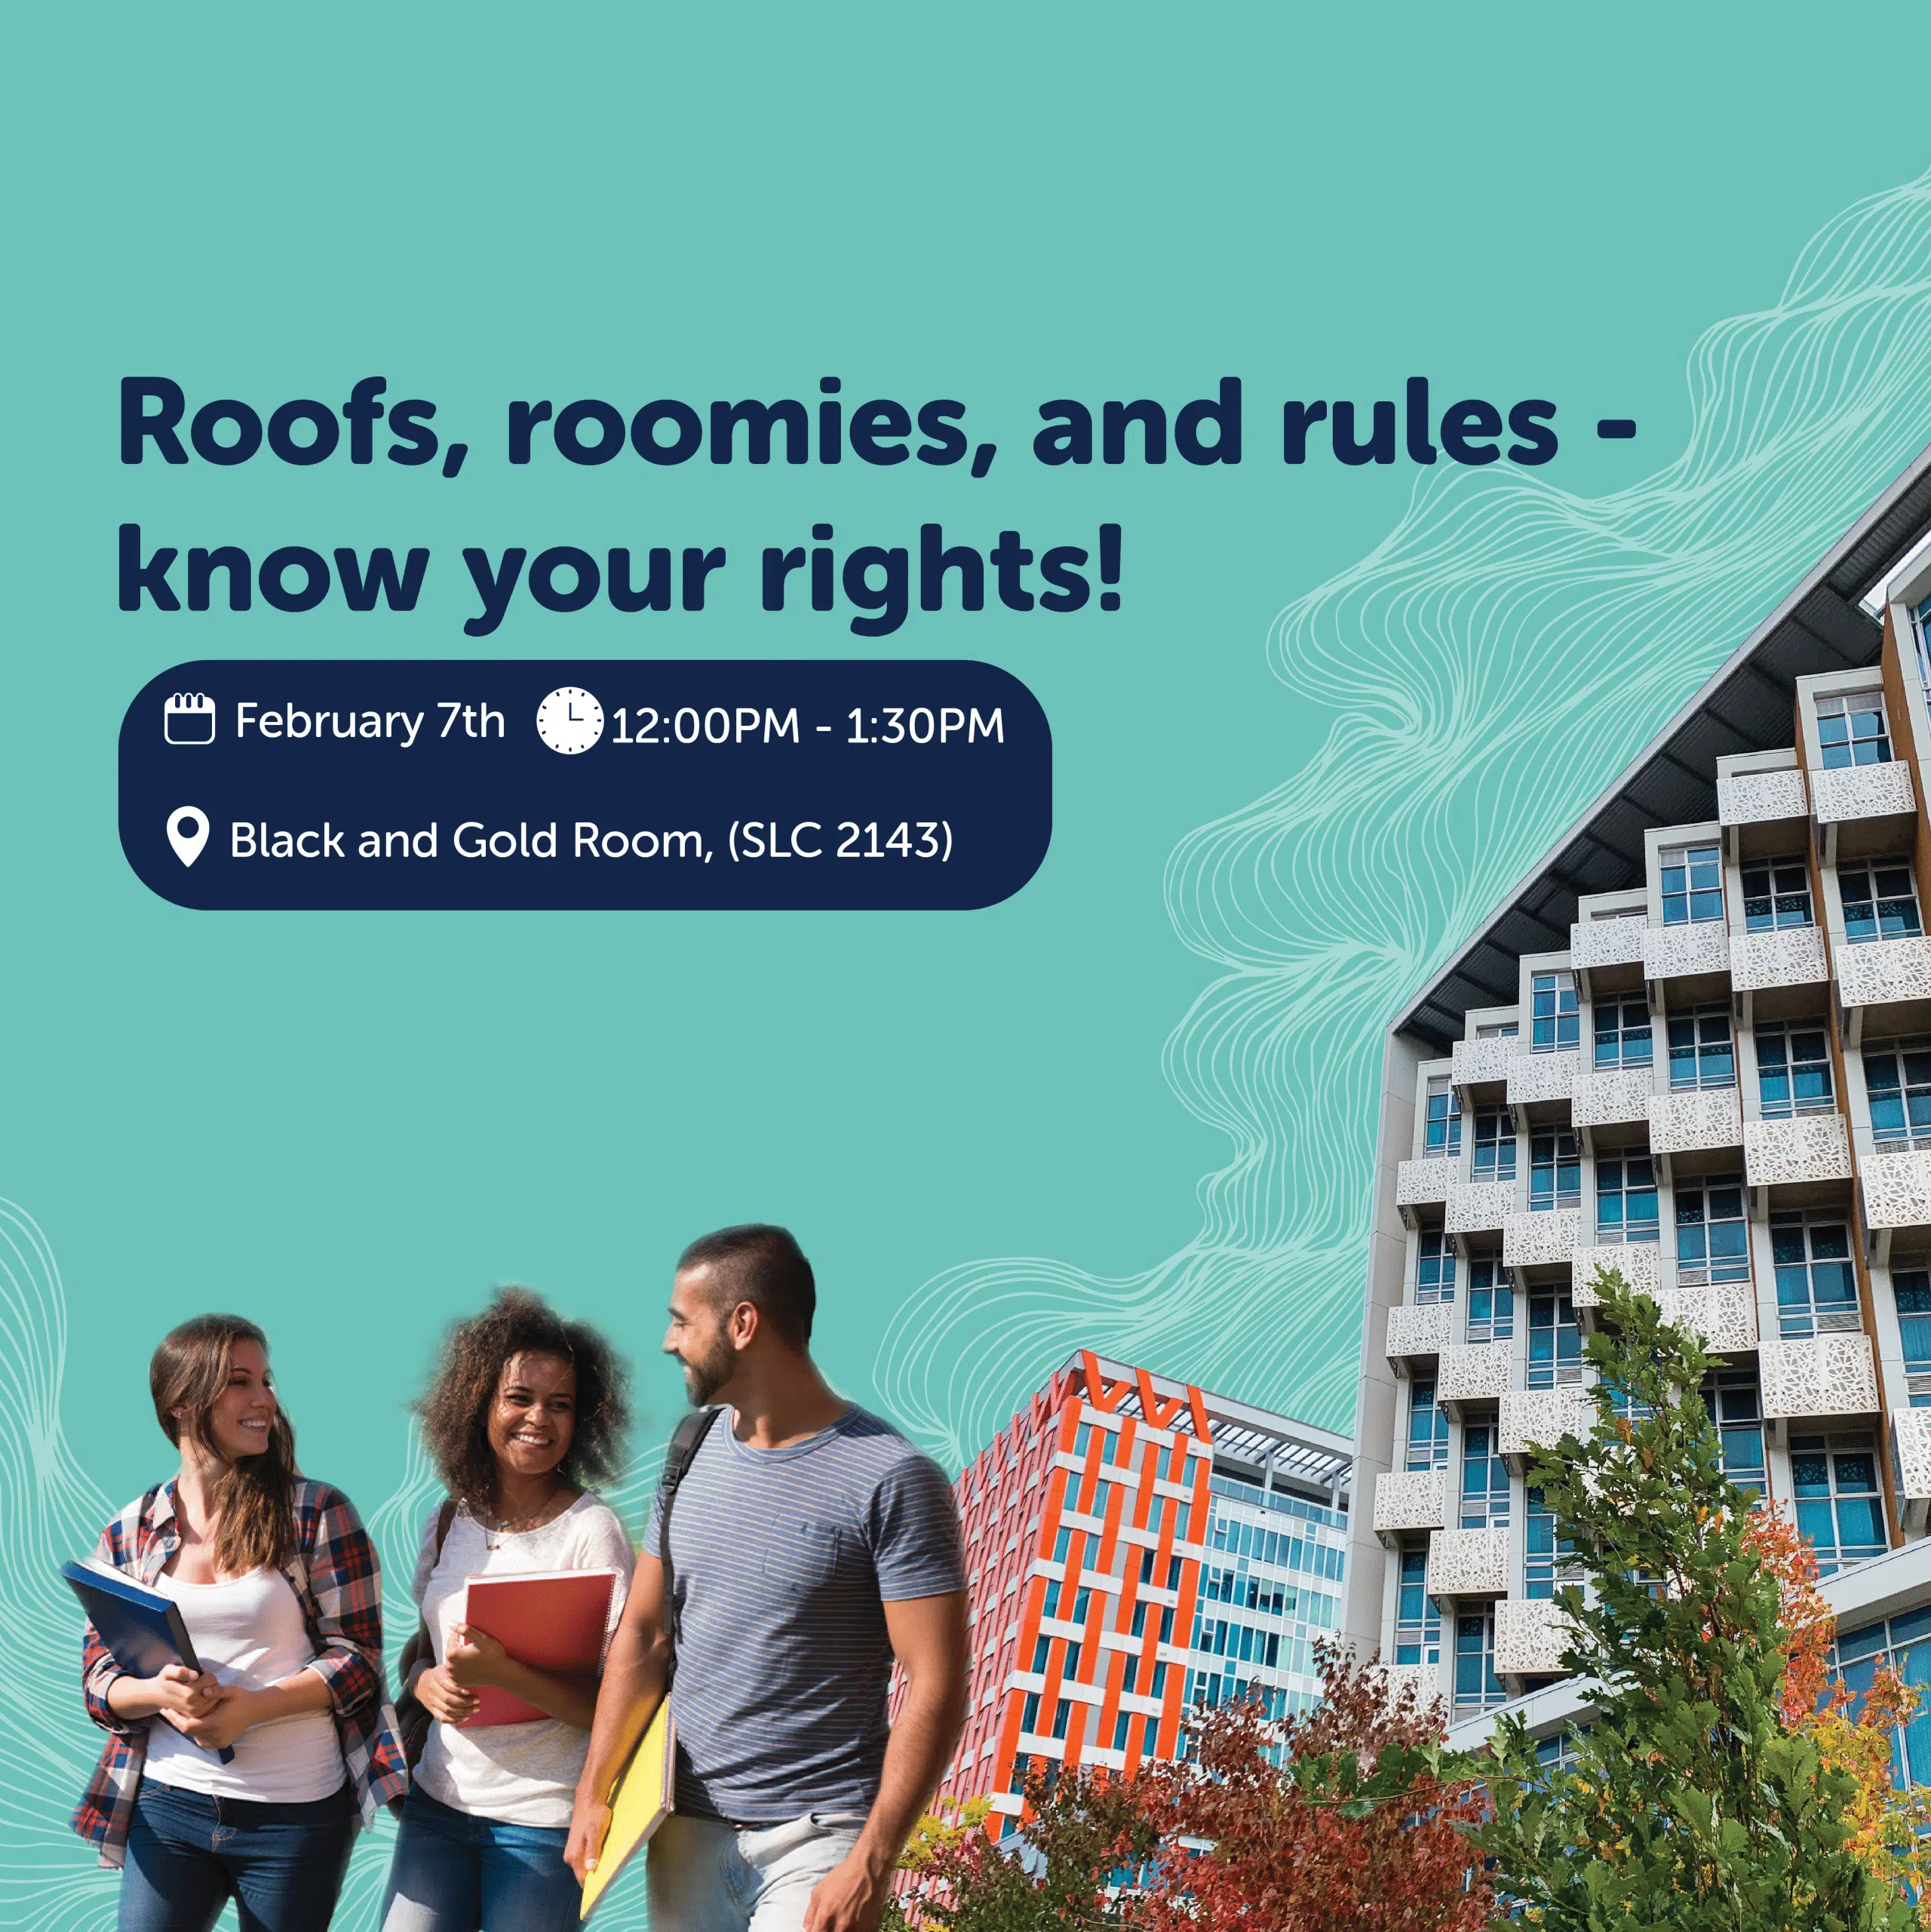 Roofs, roomies, and rules- know your rights! Advocacy event February 7th